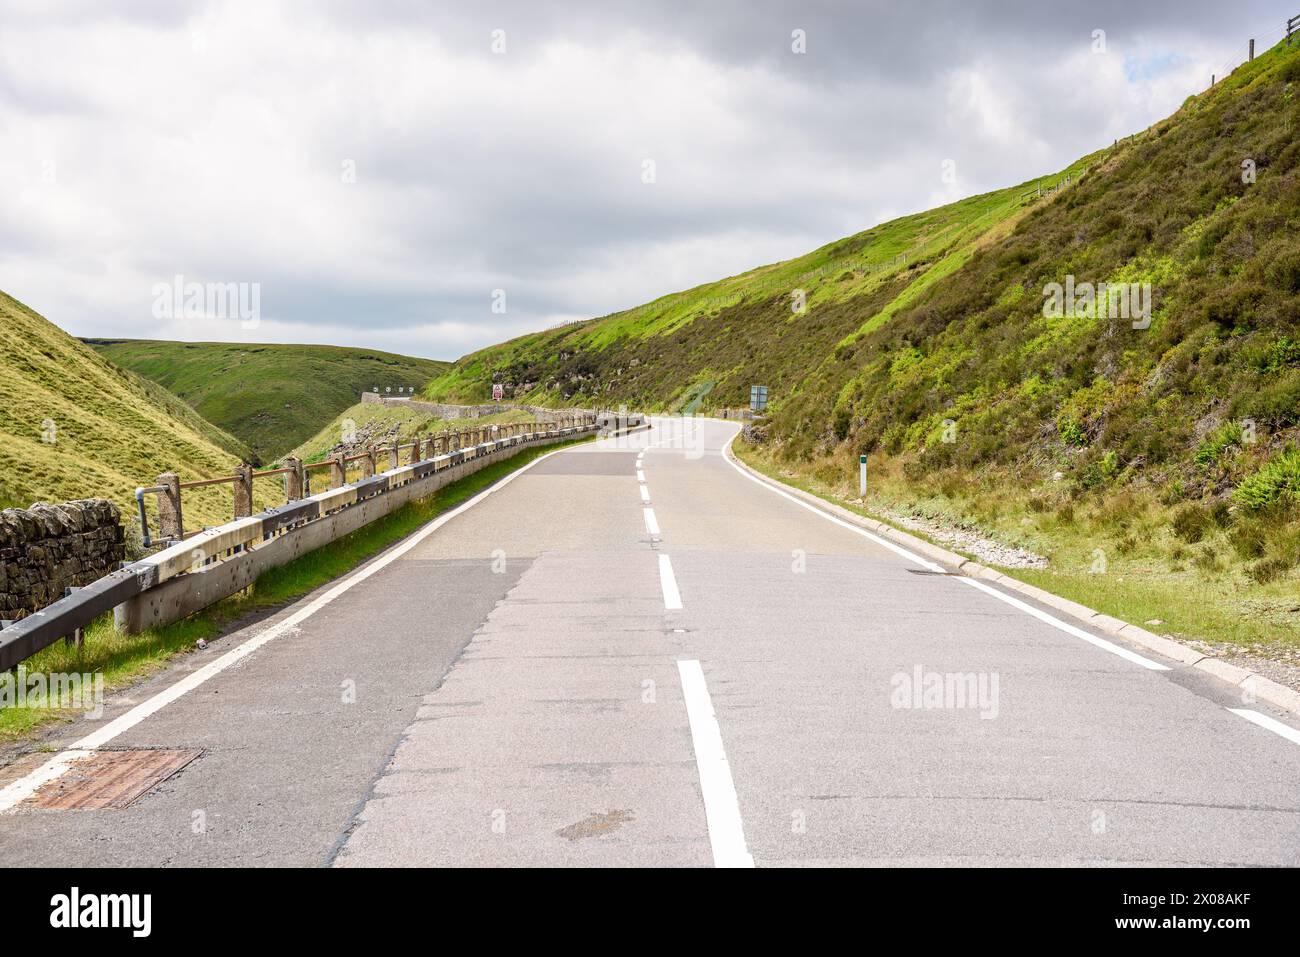 Deserted mountain pass road in England on a cloudy summer day Stock Photo